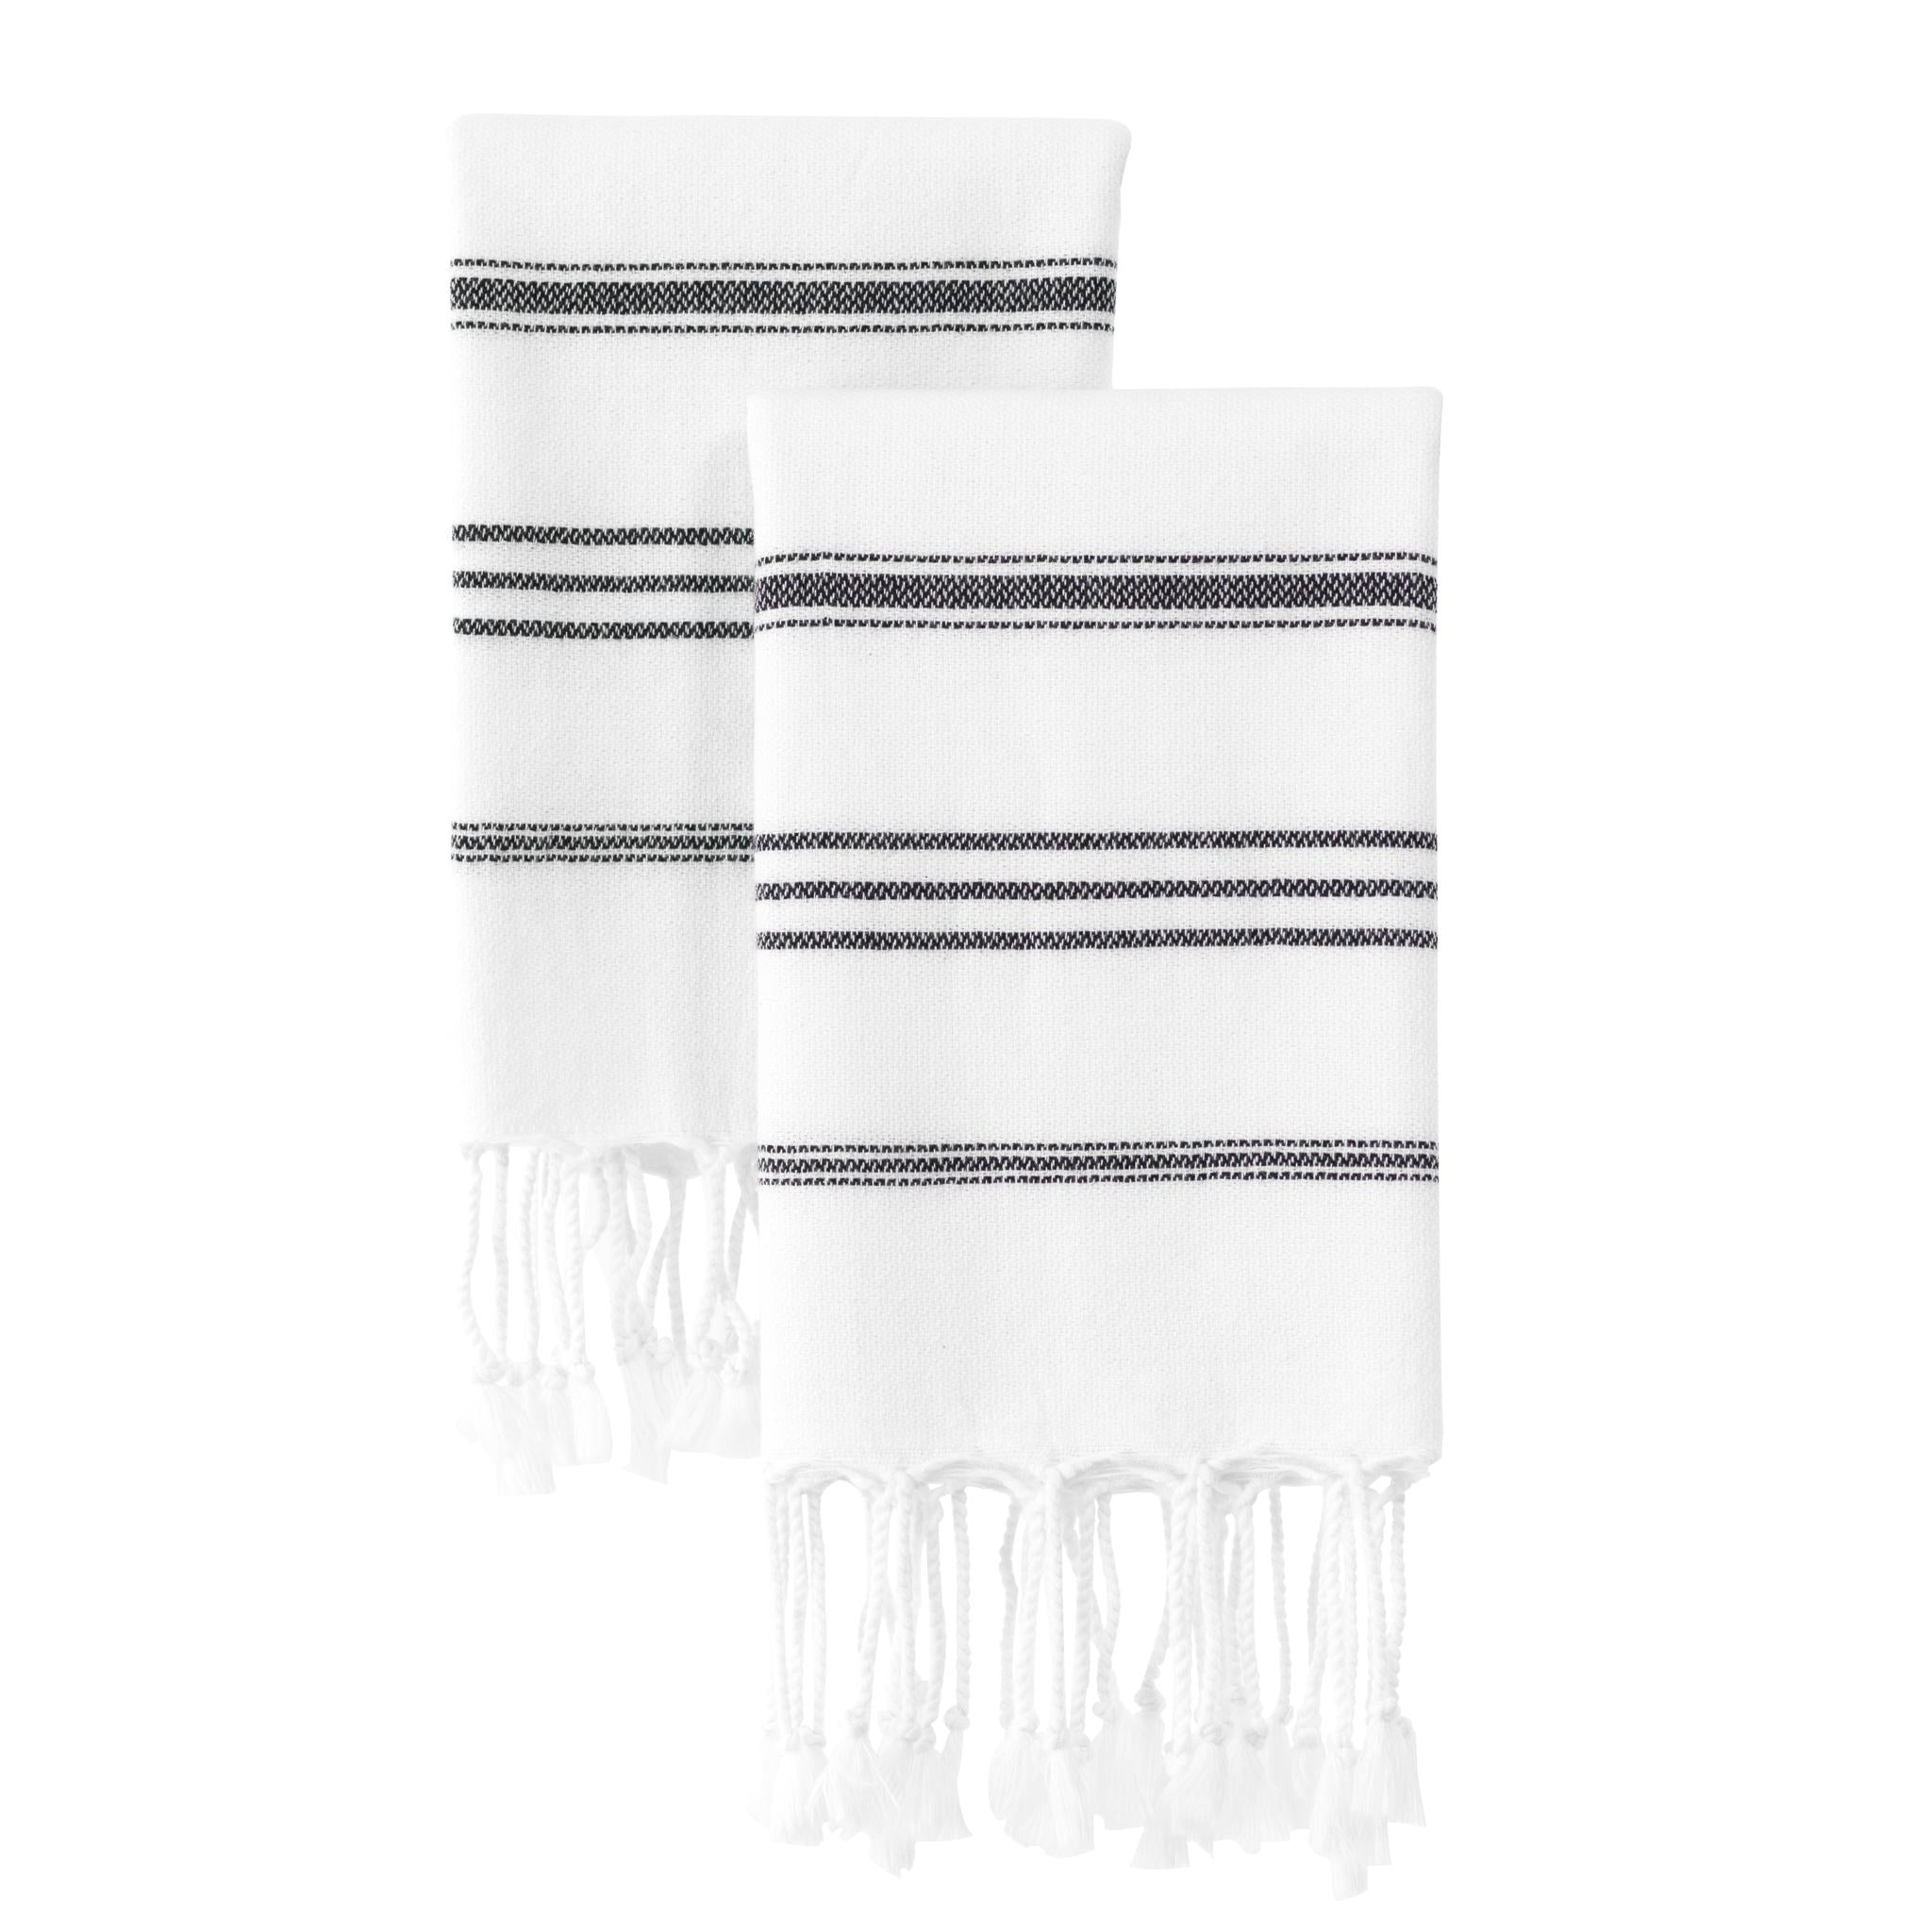 WETCAT Turkish Hand Towels with Hanging Loop (20 x 30) - Set of 2, 100%  Cotton, Soft - Prewashed Unique Boho Farmhouse Kitchen Towels - Black and  White Hand Towels for Bathroom Decor Black & White